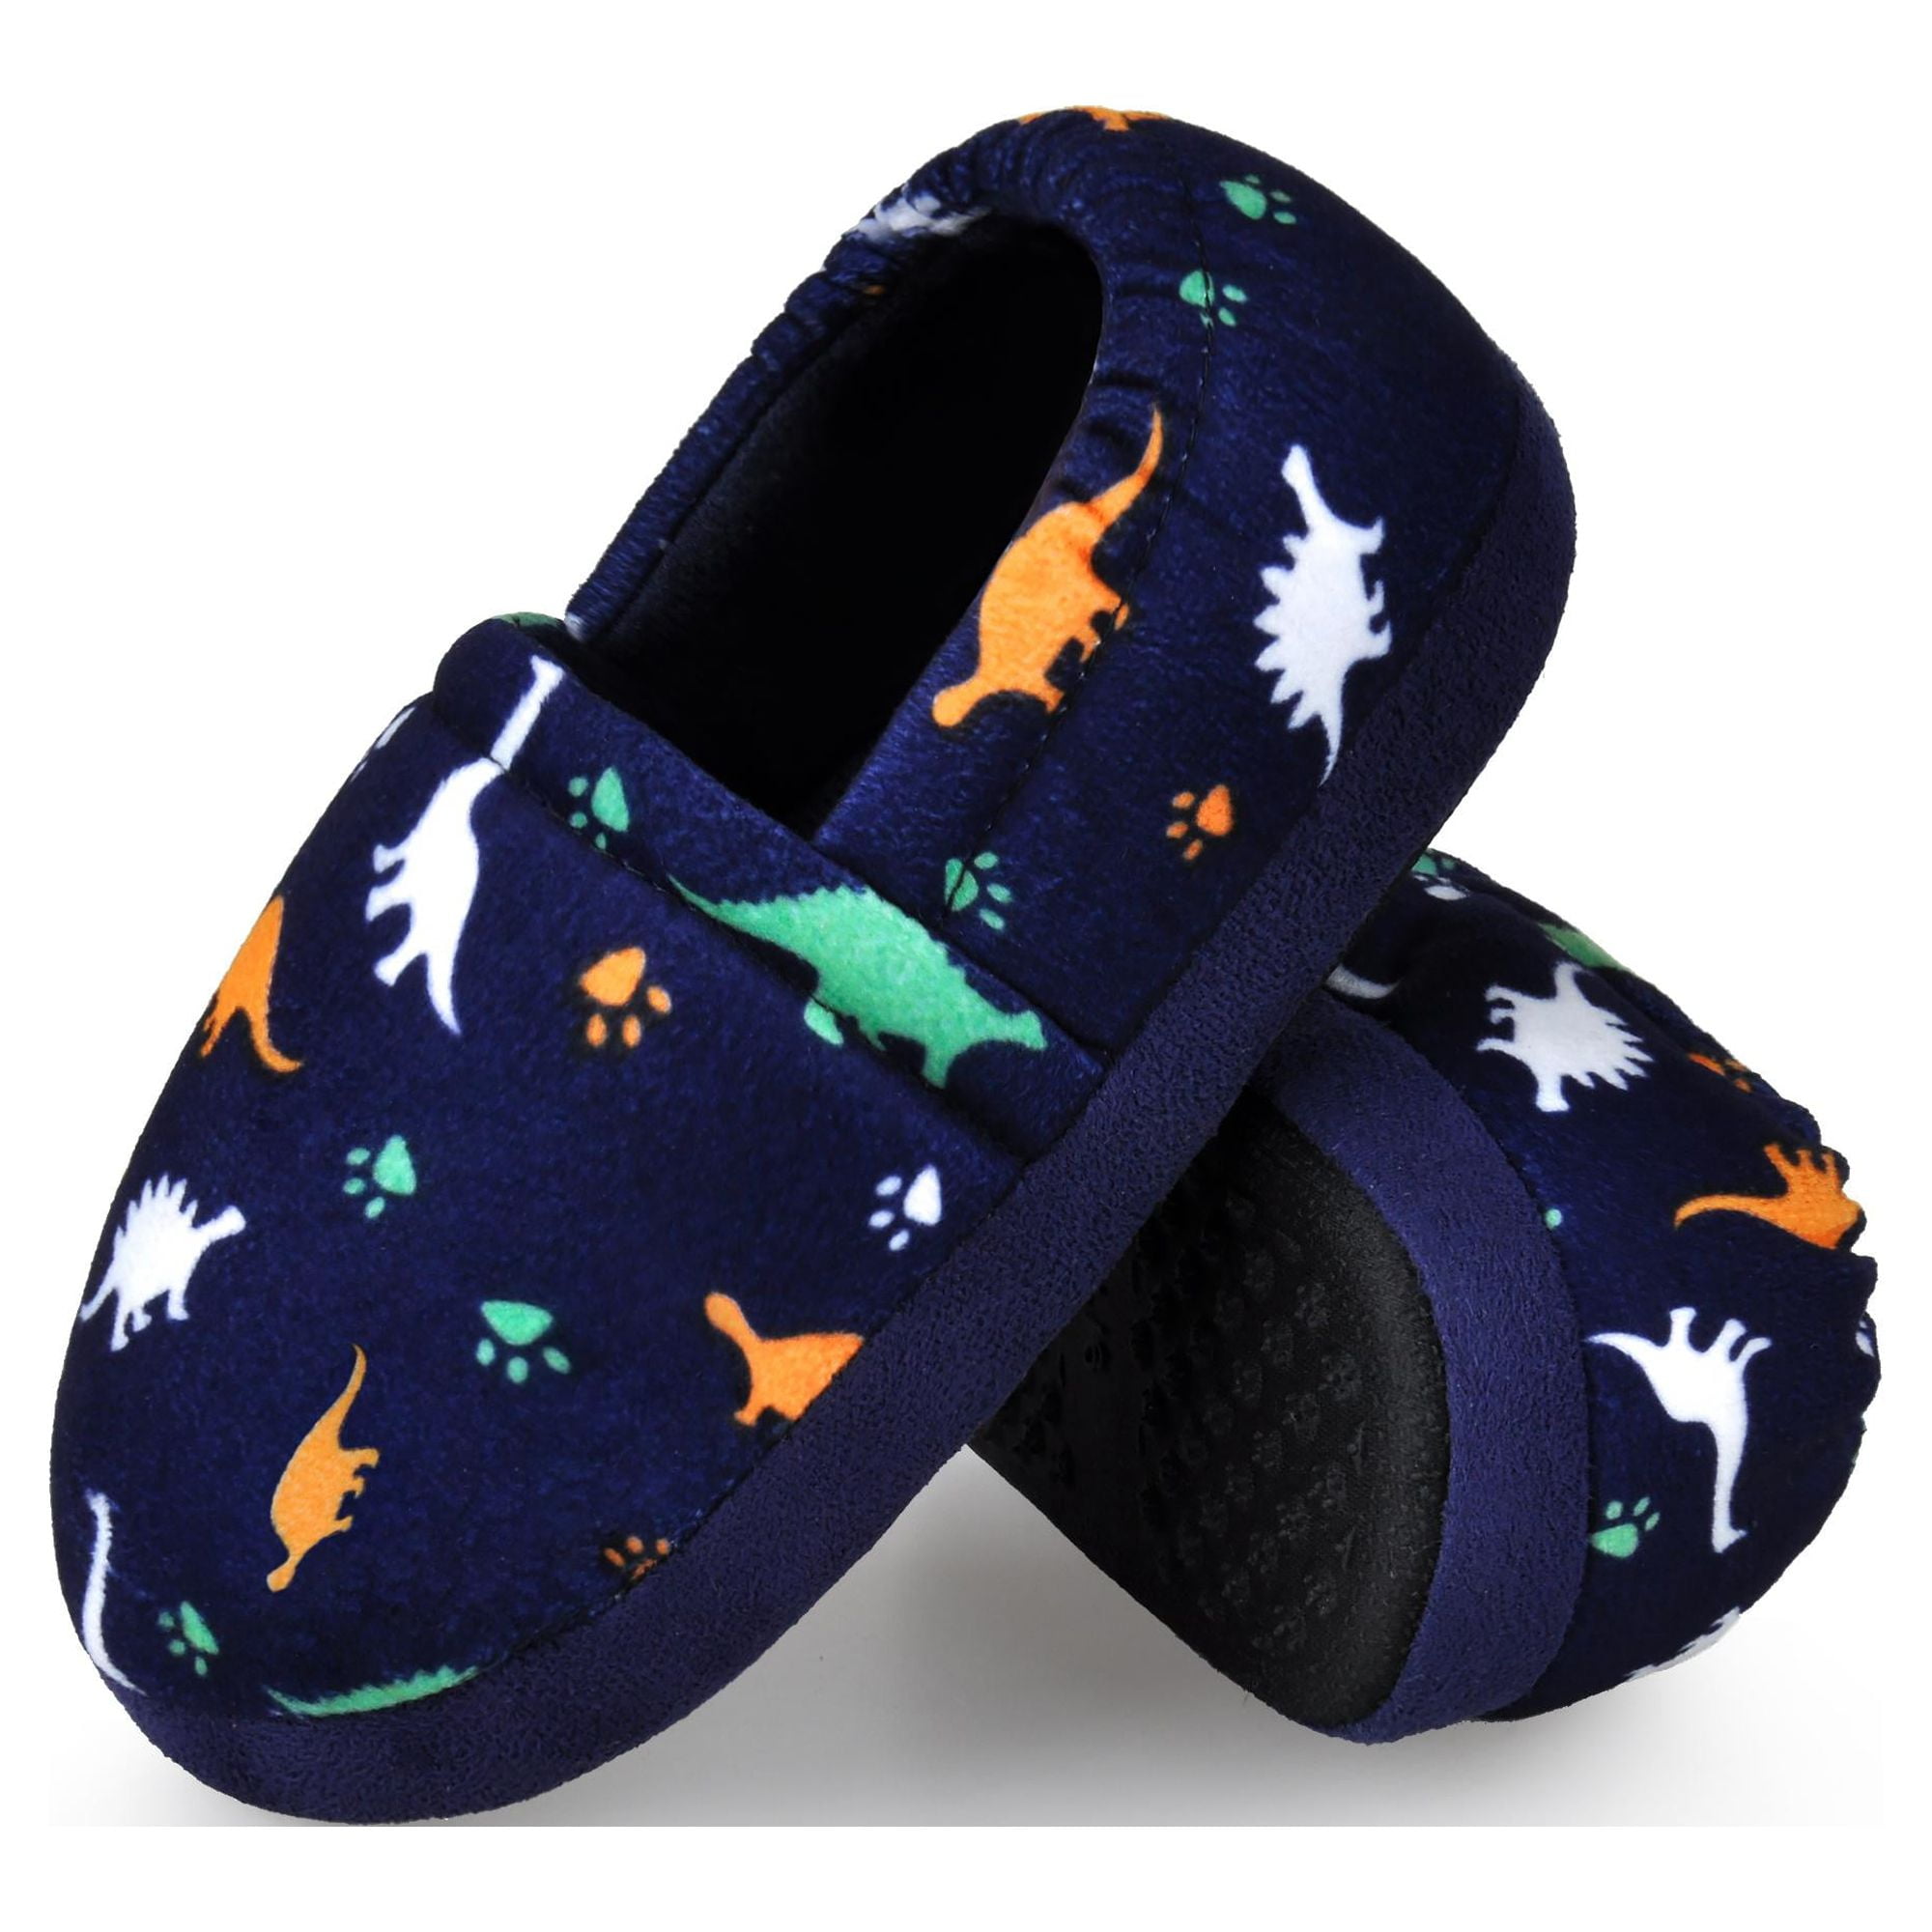 HOMEHOT Little Kid Boys Slippers House Shoes Indoor Outdoor with Anti Slip  Sole Black Size 11-12 US - Walmart.com